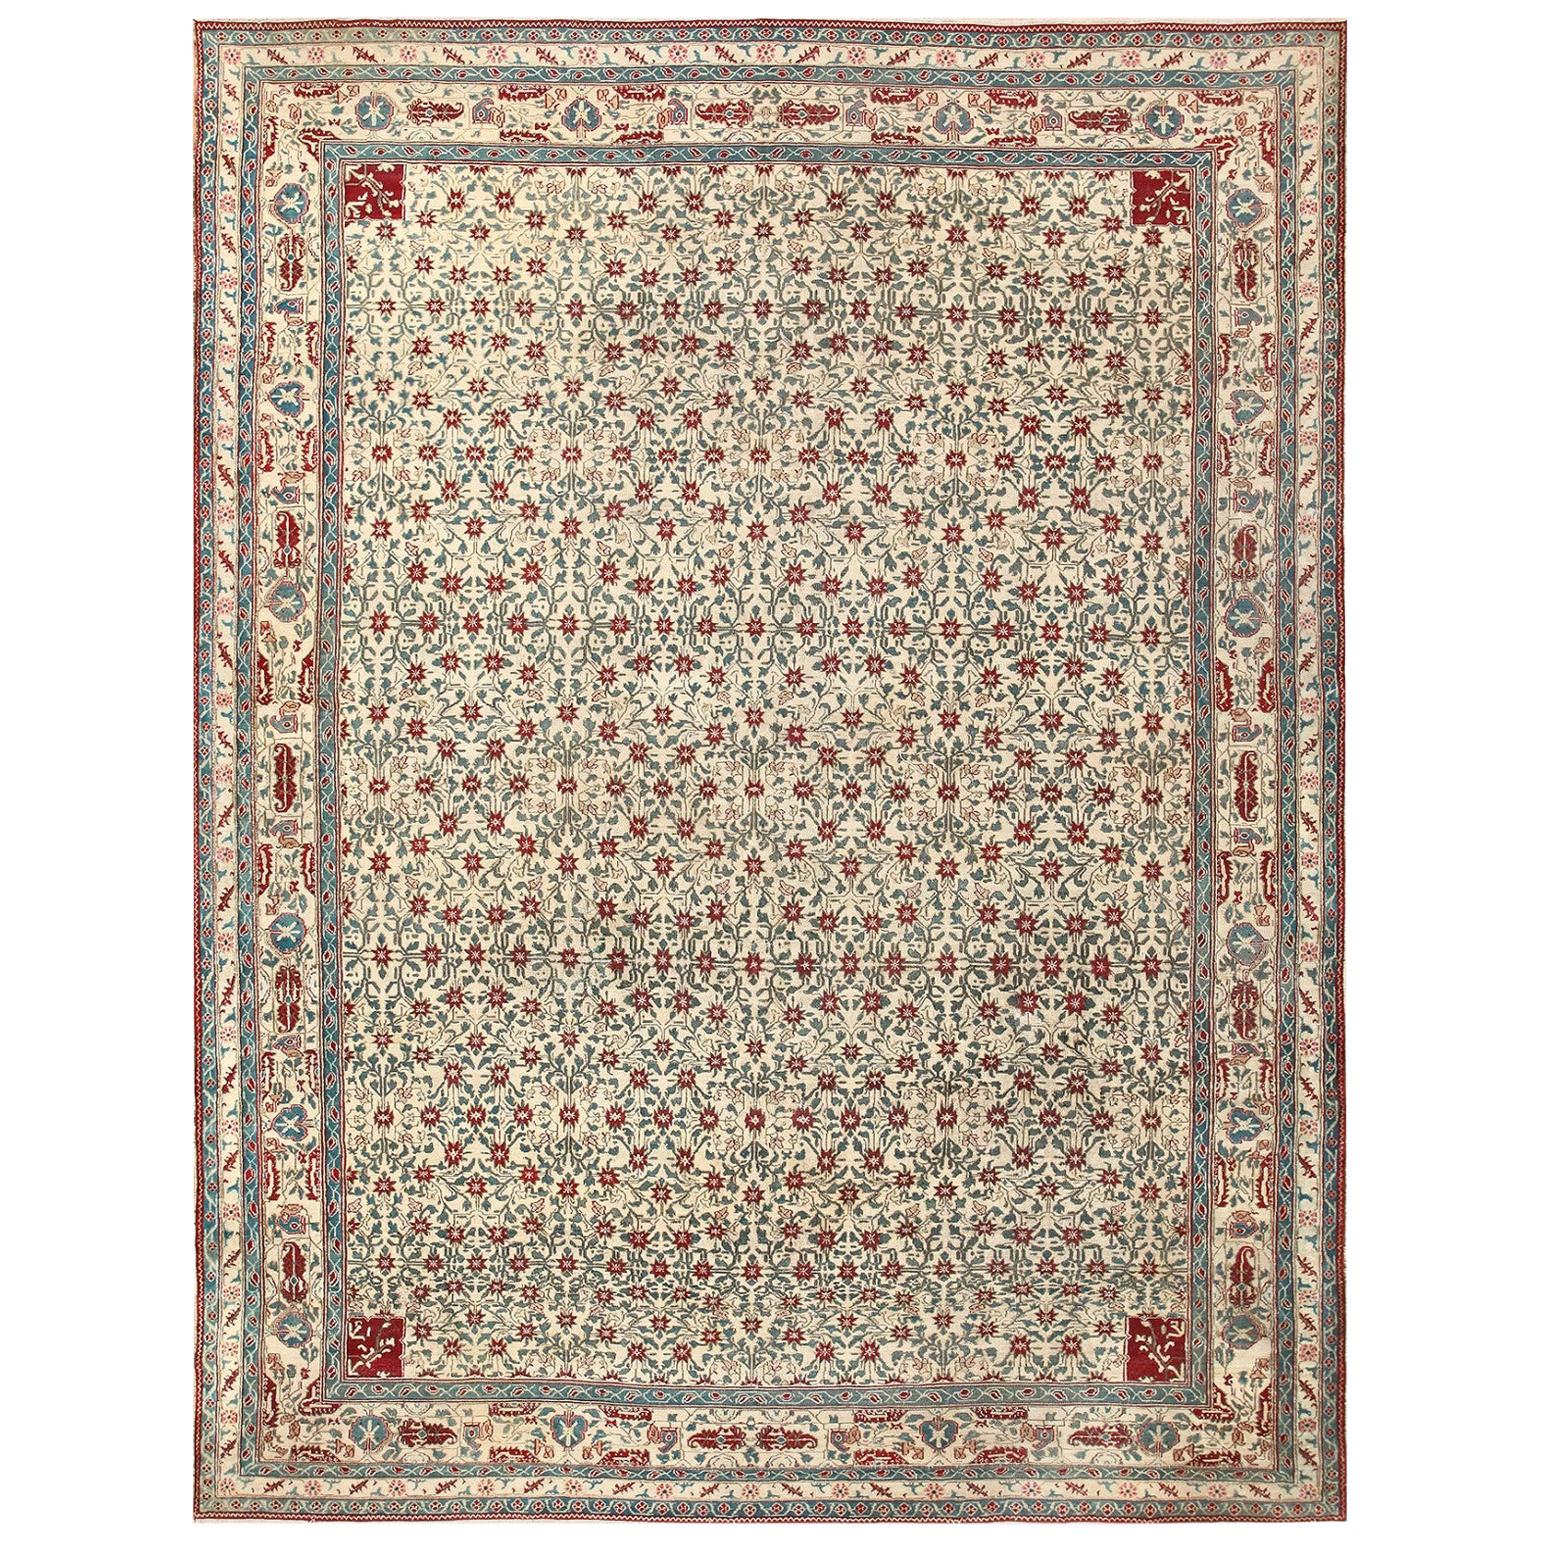 What is Agra rug?